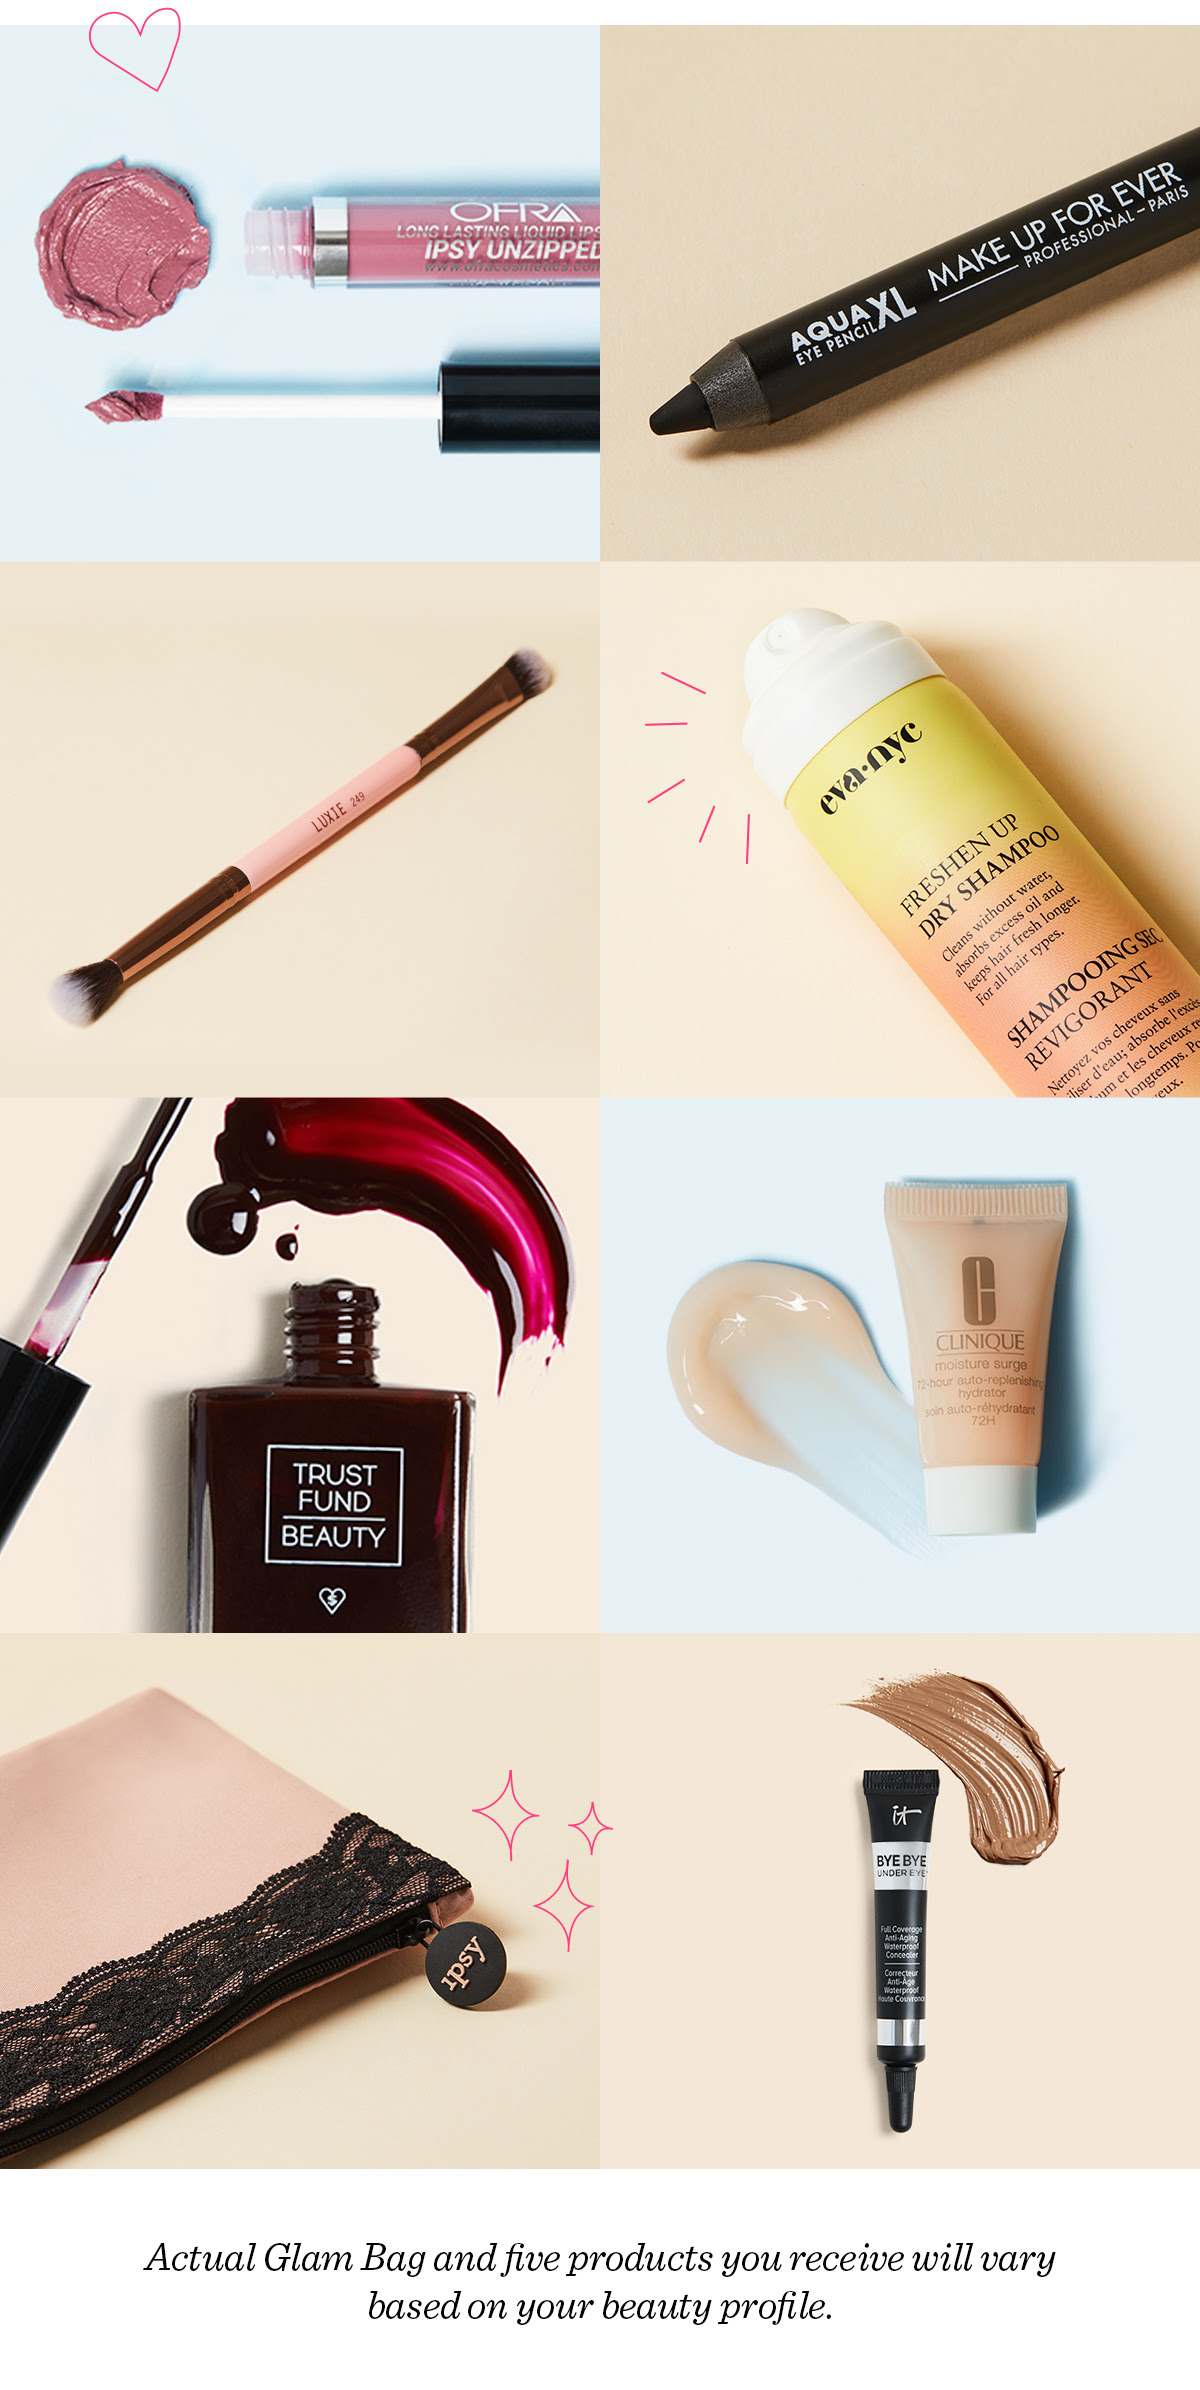 Actual Glam Bag and five products you receive will vary based on your beauty profile.